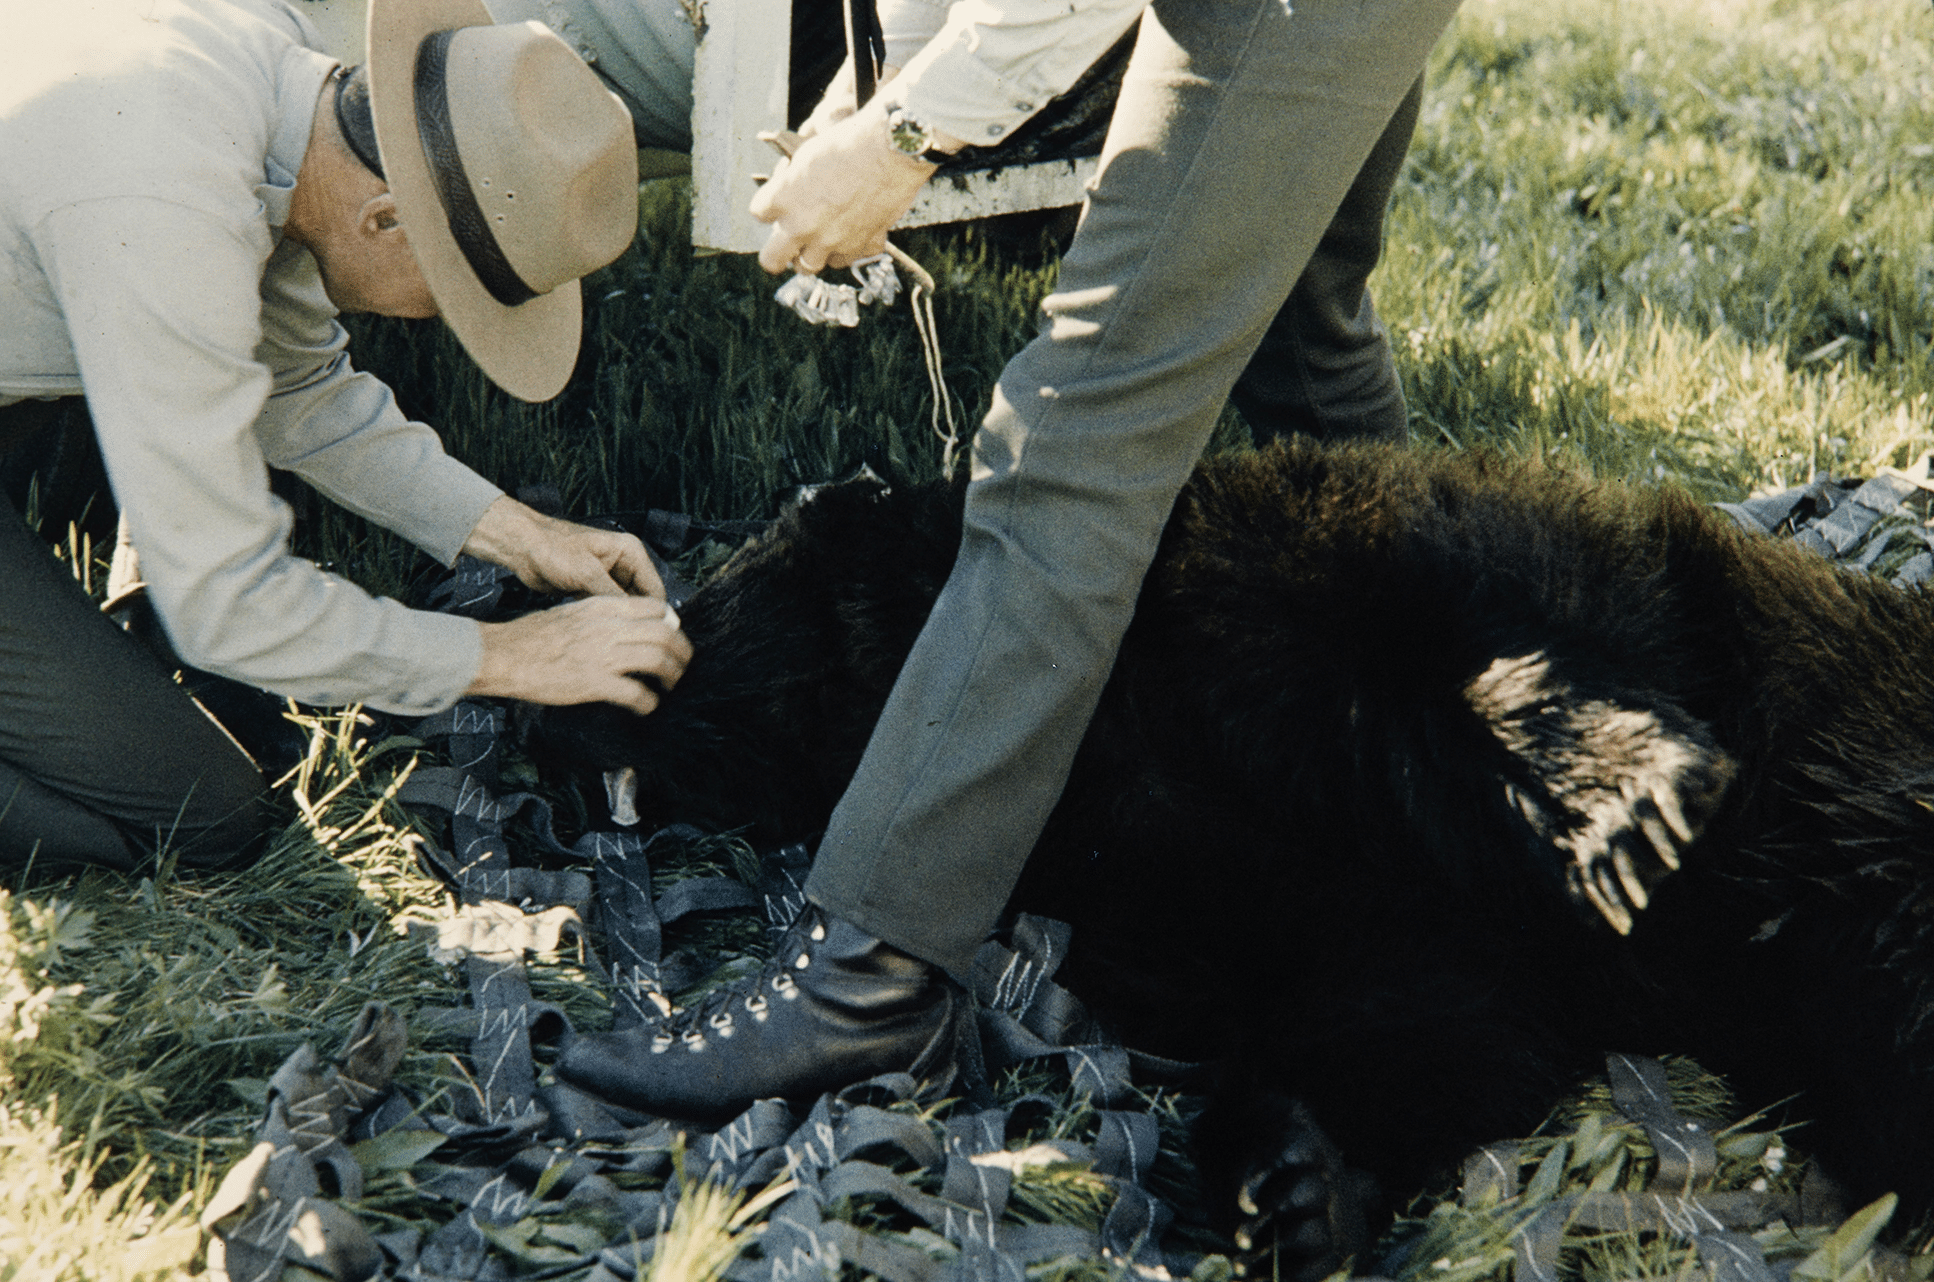 A habituated bear is dealt with by a team of rangers.